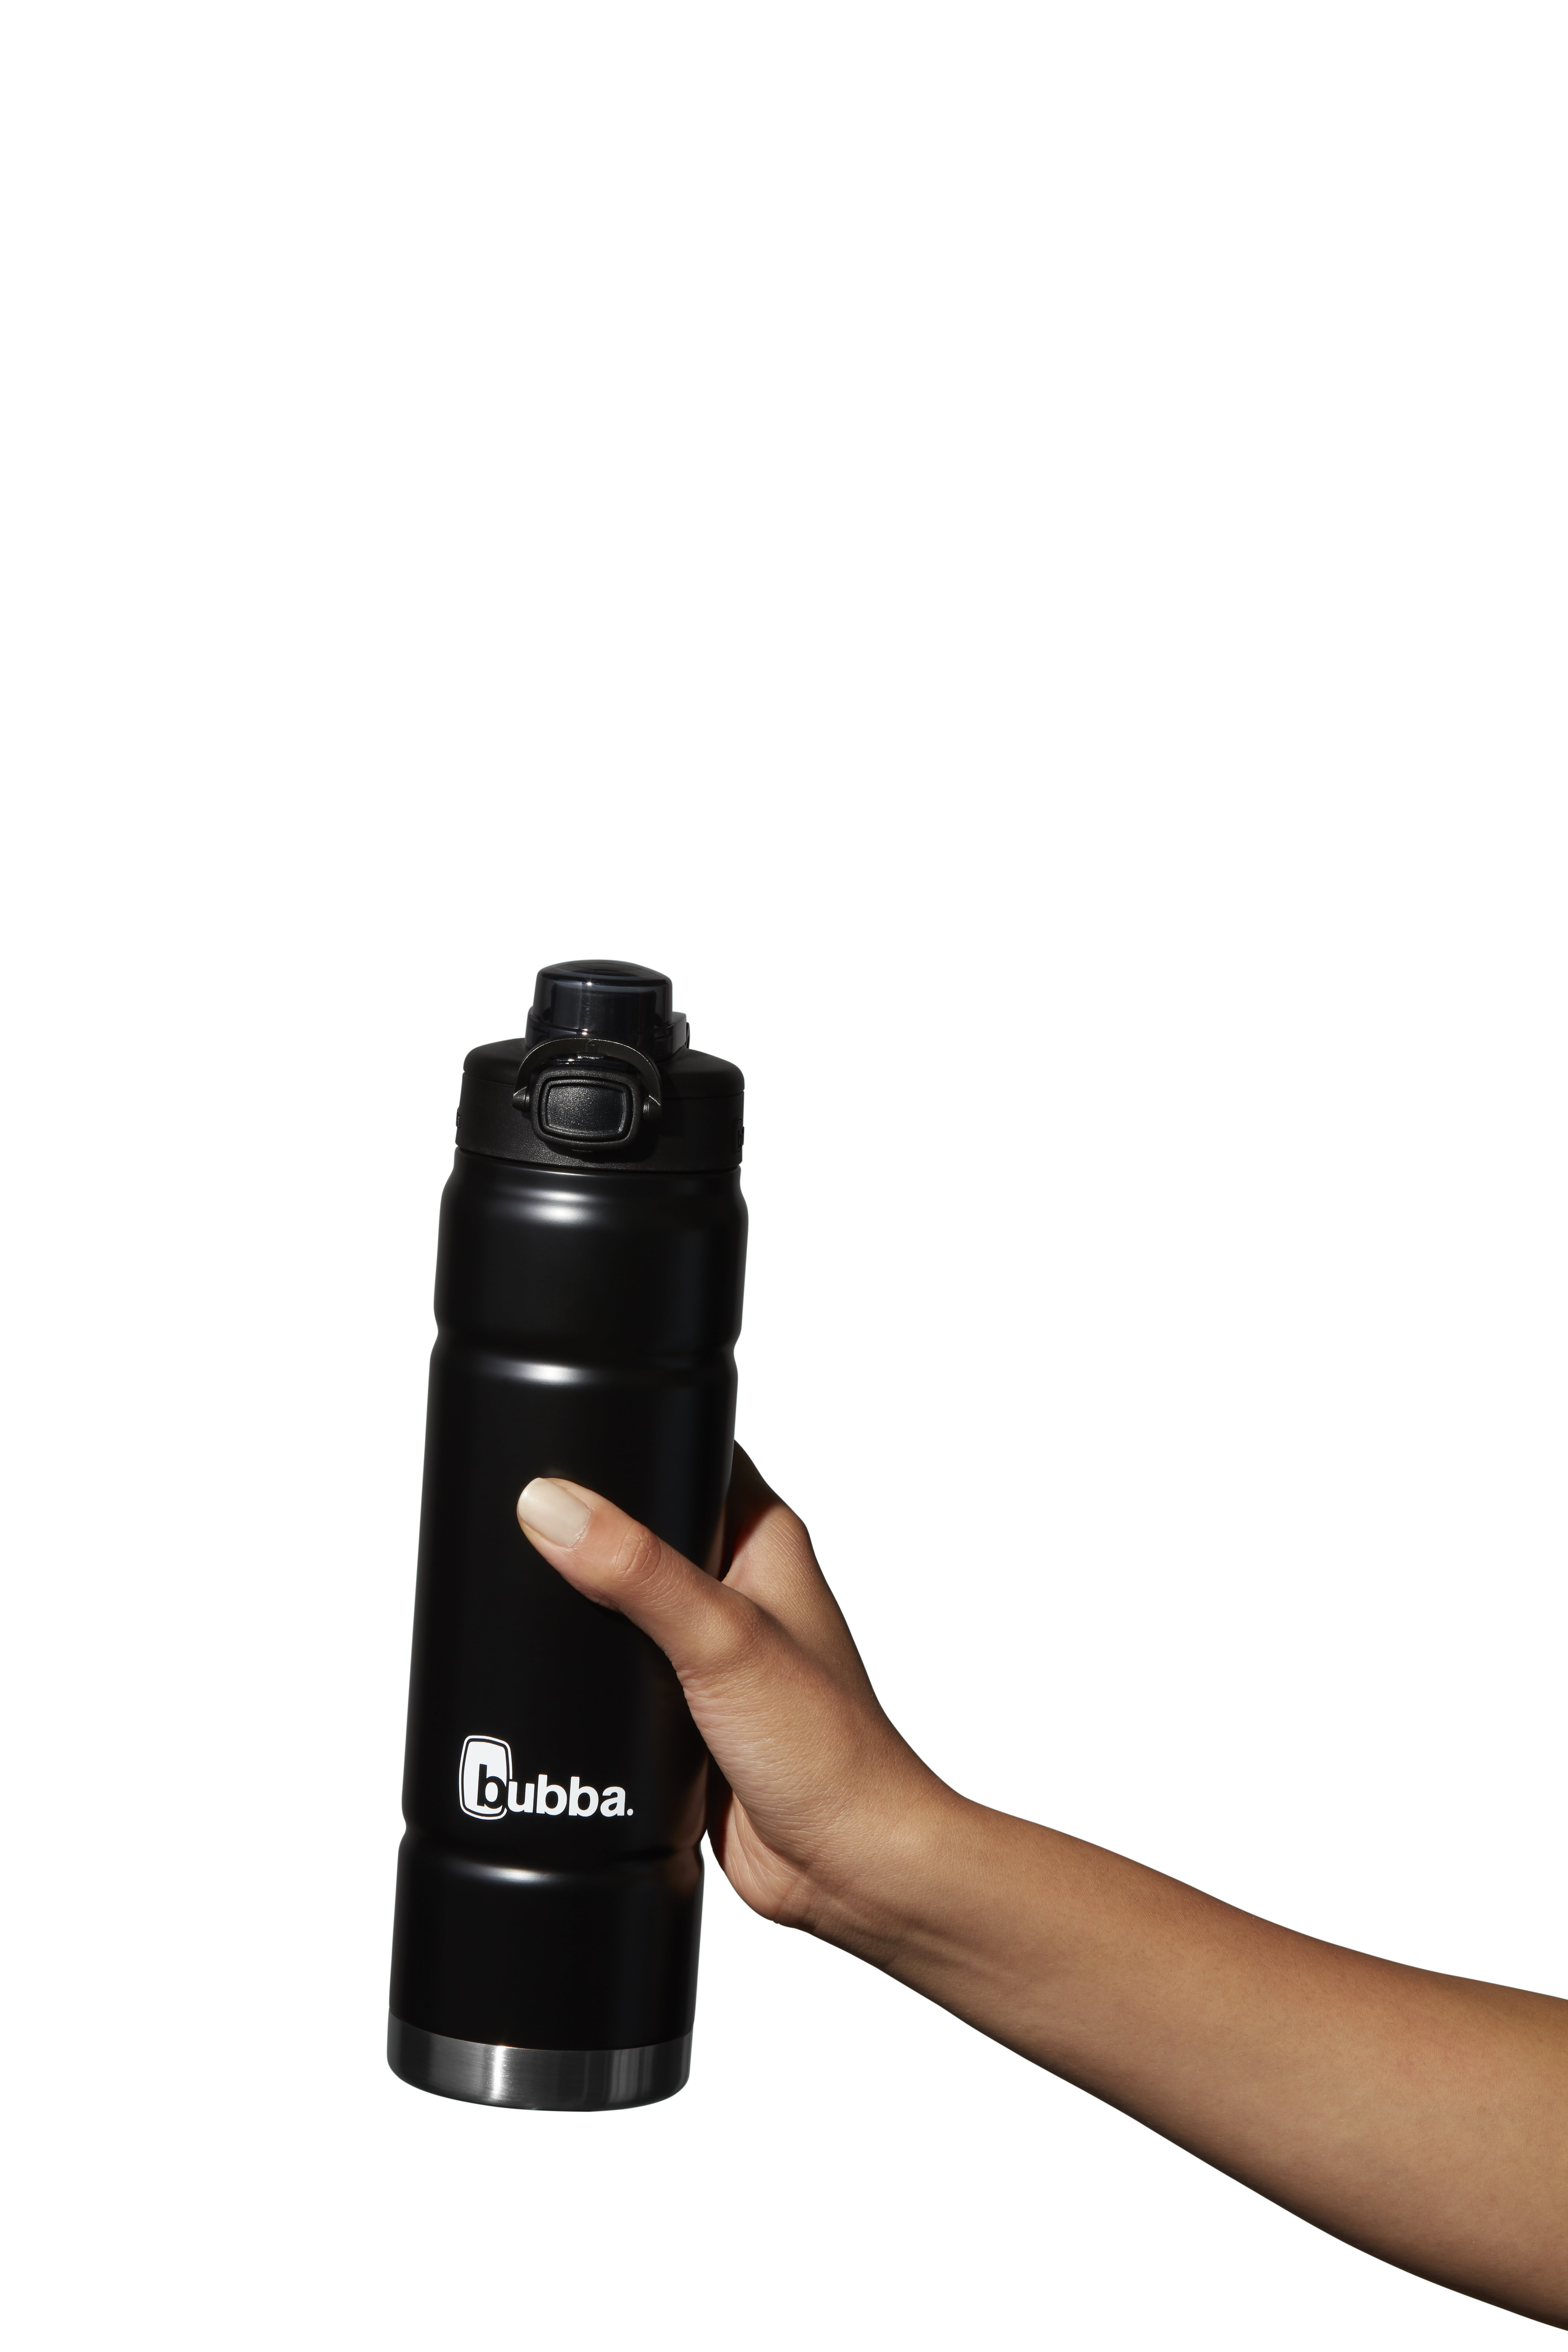 bubba 24oz Trailblazer Insulated Stainless Steel Water Bottle with Wide  Mouth Tutti Fruity 1 ct